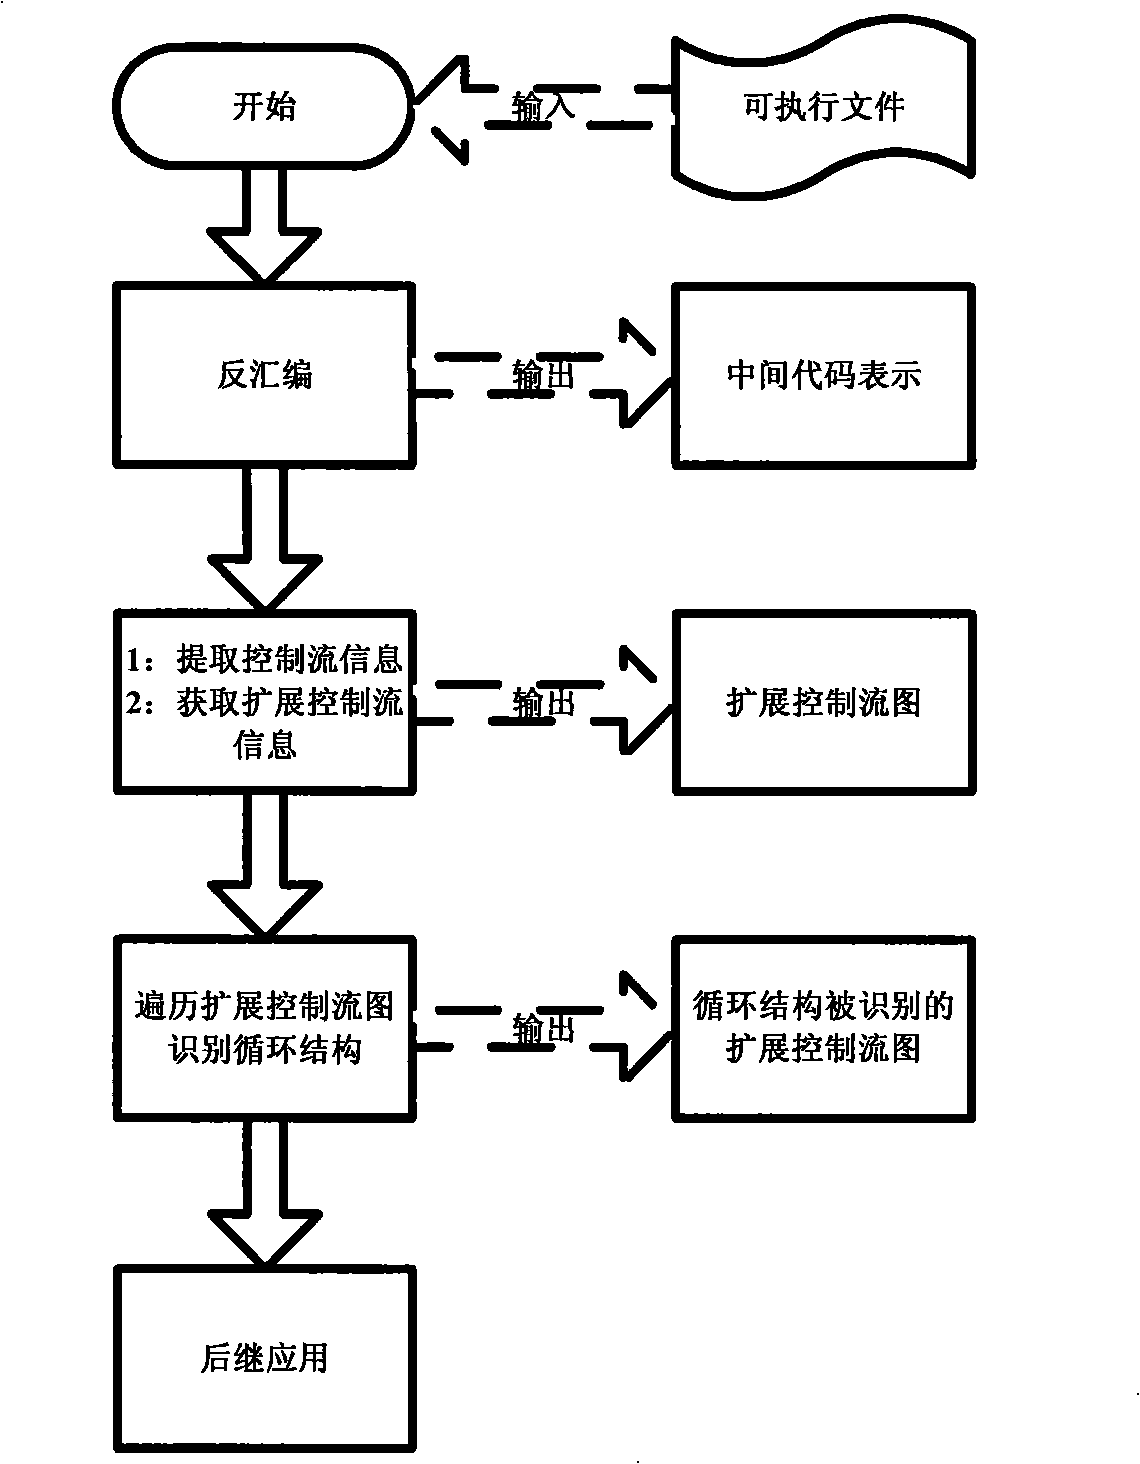 Recognition method of nested loop structure